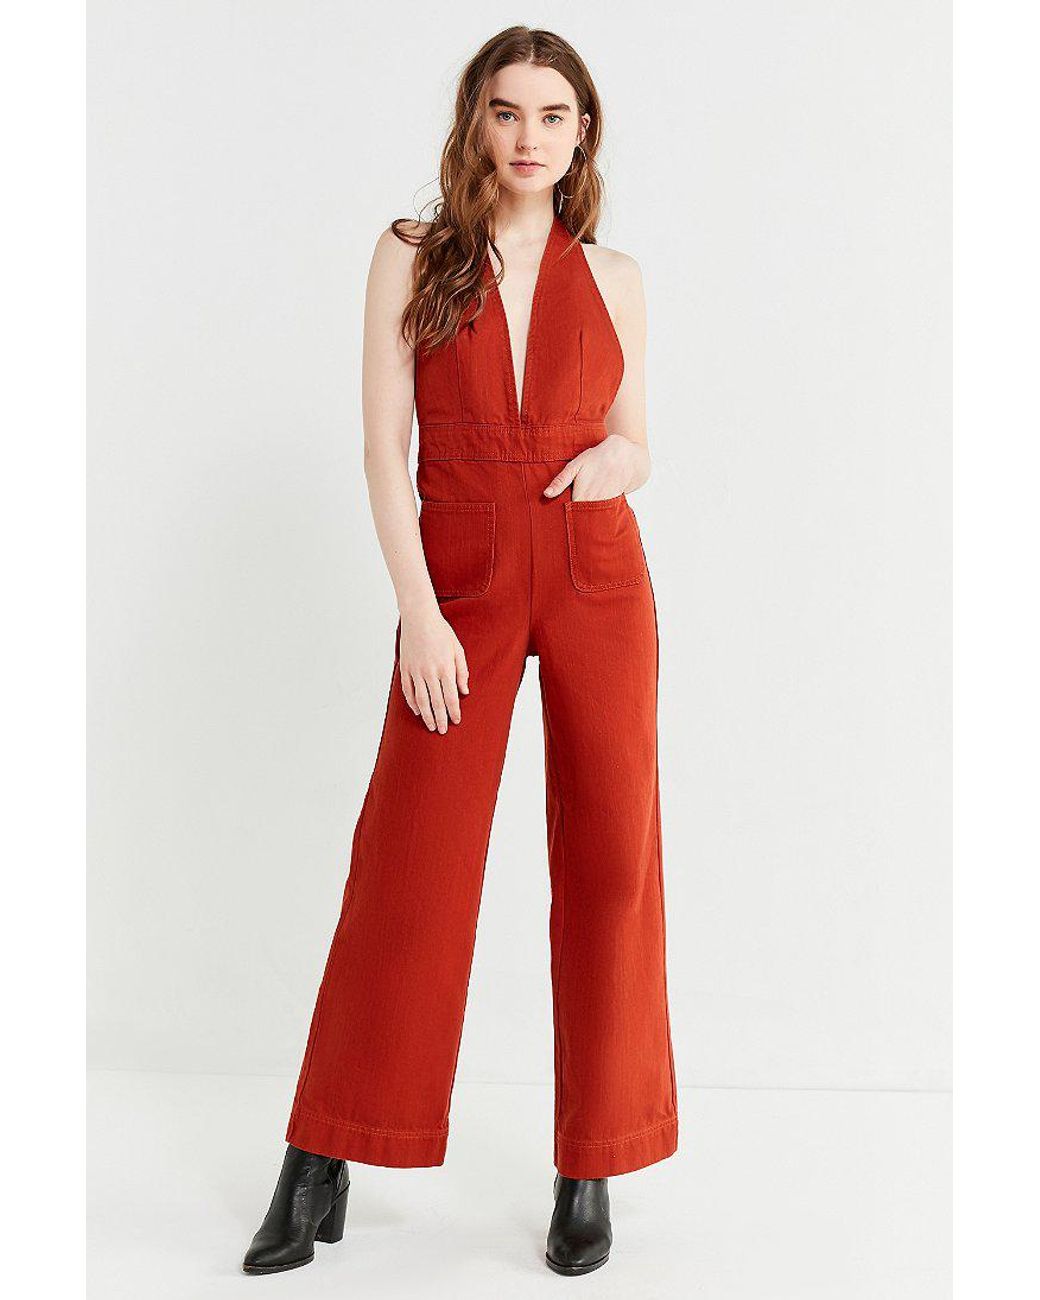 Plus Plunging Neck Denim Jumpsuit Without Tube | SHEIN IN